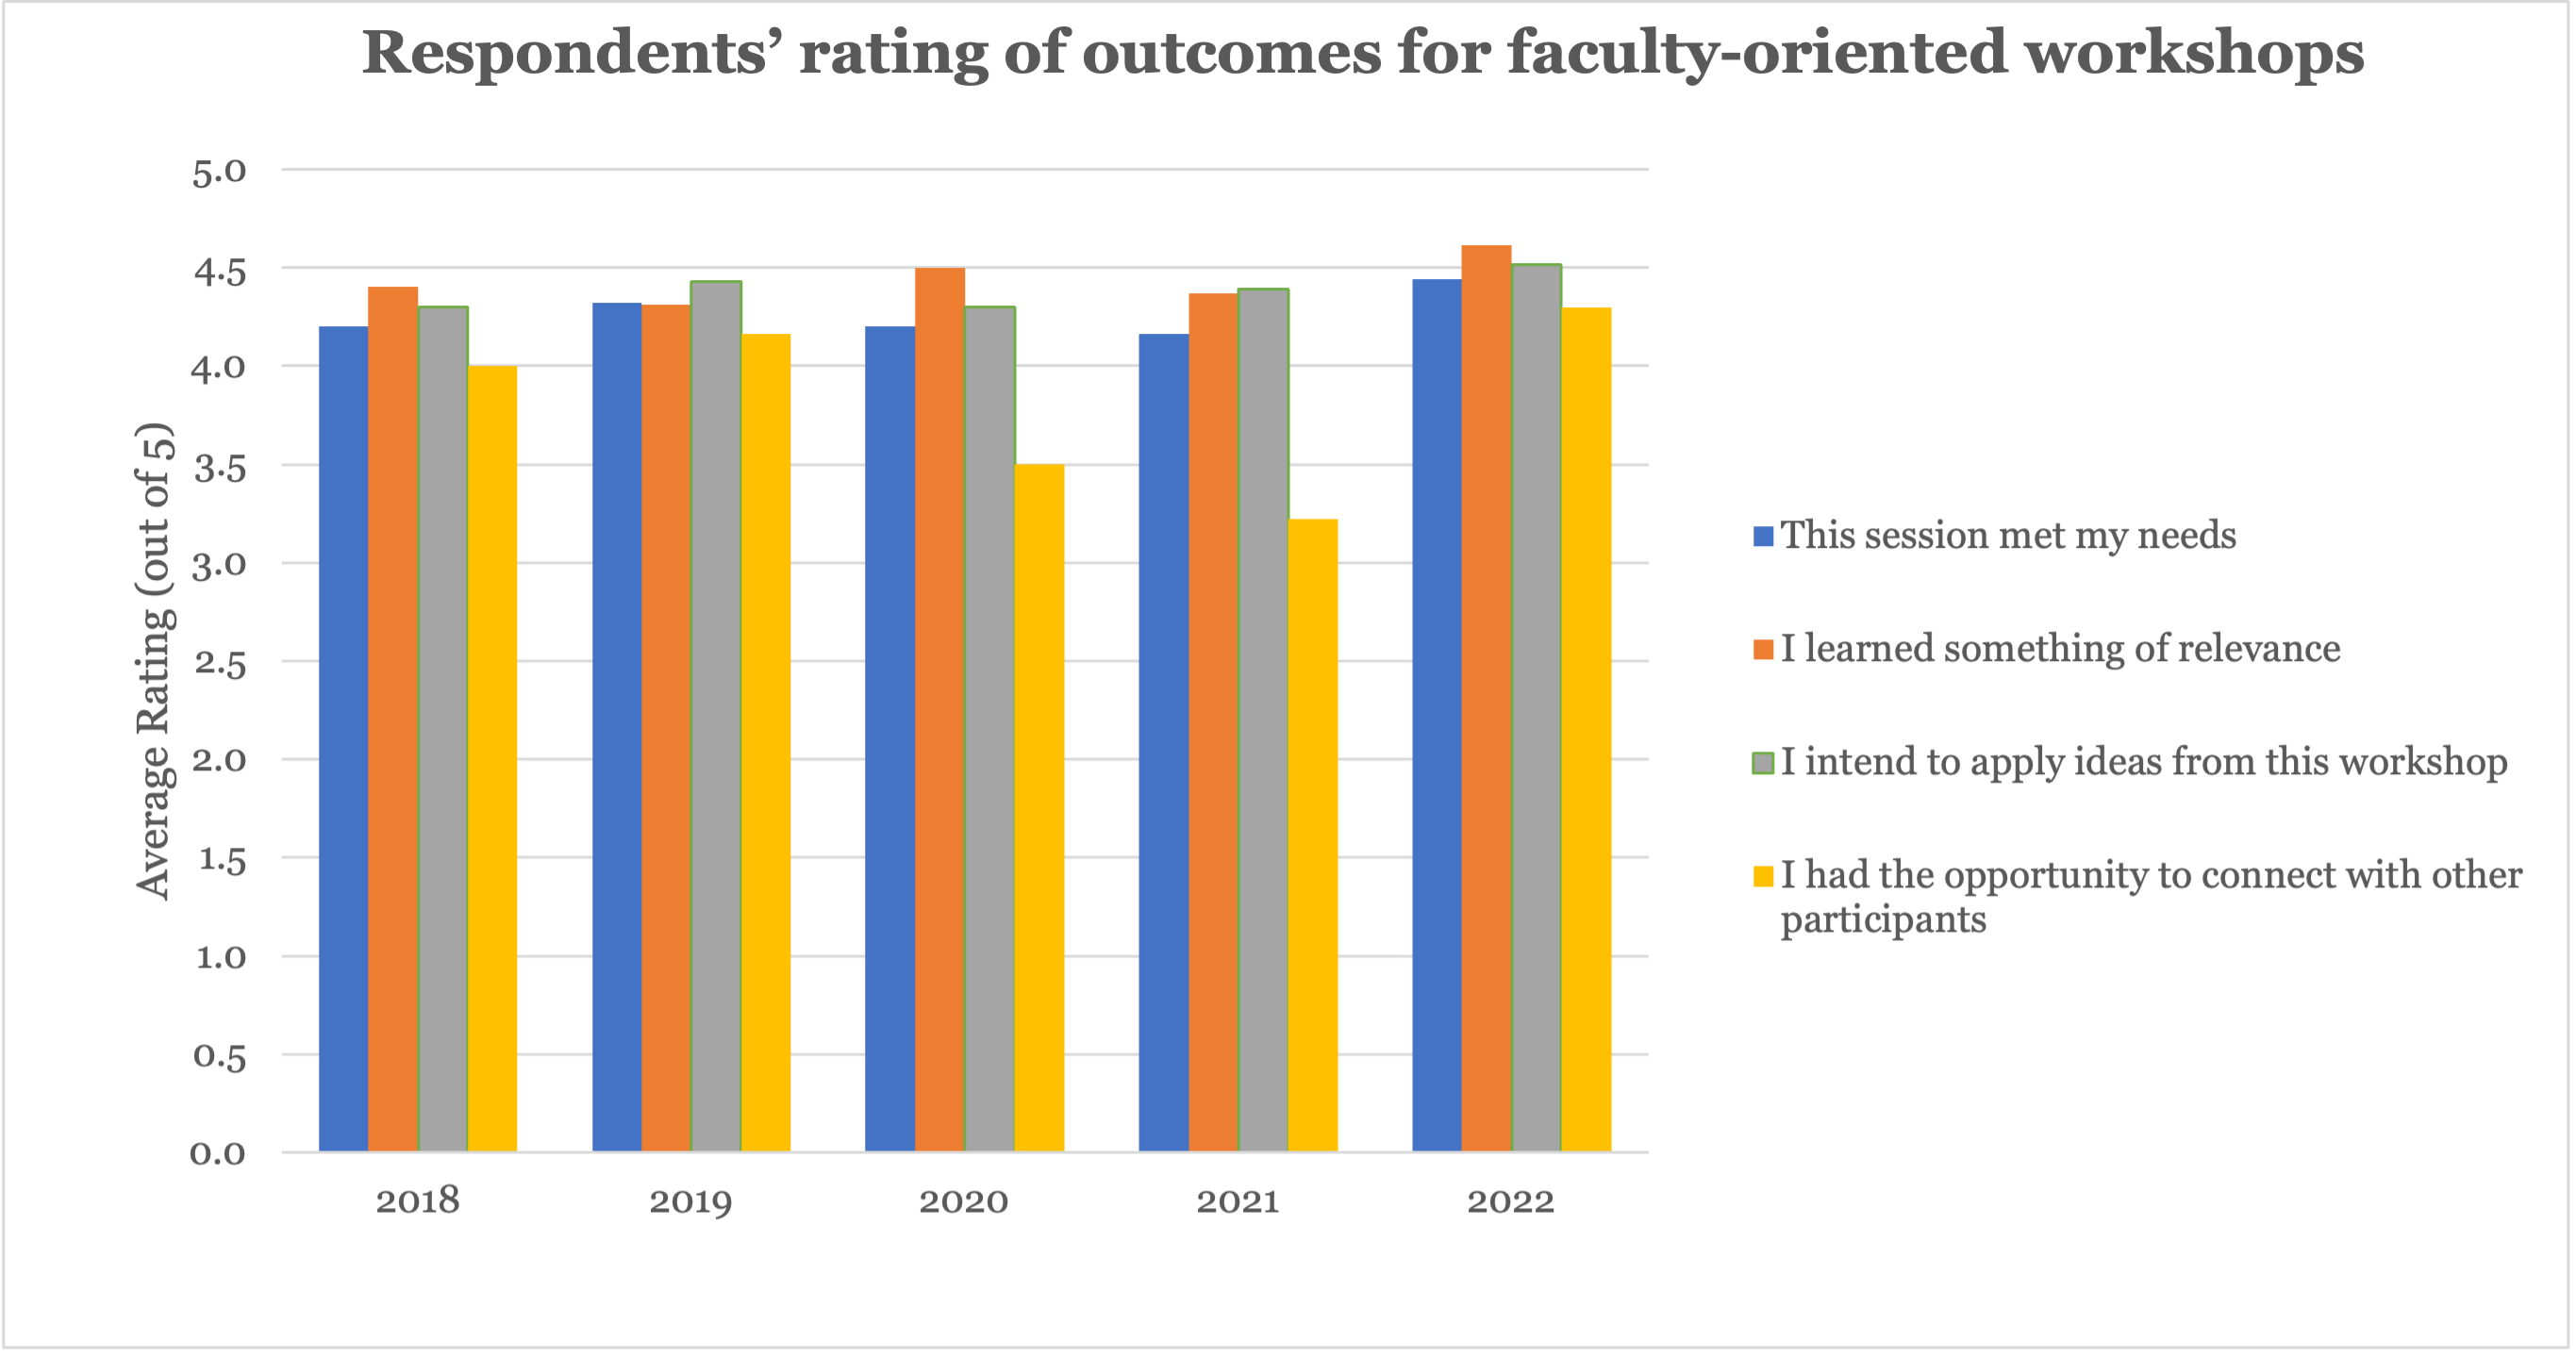 Figure 3. Clustered vertical bar graph showing respondents’ ratings (0-5) of outcomes for faculty-oriented workshops, by year (2018 to 2022). Interpreted for e-readers by outcome first, followed by year: OUTCOME 1 “This session met my needs”: 2018 – 4.2, 2019 – 4.3, 2020 – 4.2, 2021 – 4.2, 2022 – 4.4; OUTCOME 2 “I learned something of relevance”: 2018 – 4.4, 2019 – 4.3, 2020 – 4.5, 2021 – 4.4, 2022 – 4.6; OUTCOME 3 “I intend to apply ideas from this workshop”: 2018 – 4.3, 2019 – 4.4, 2020 – 4.3, 2021 – 4.4,